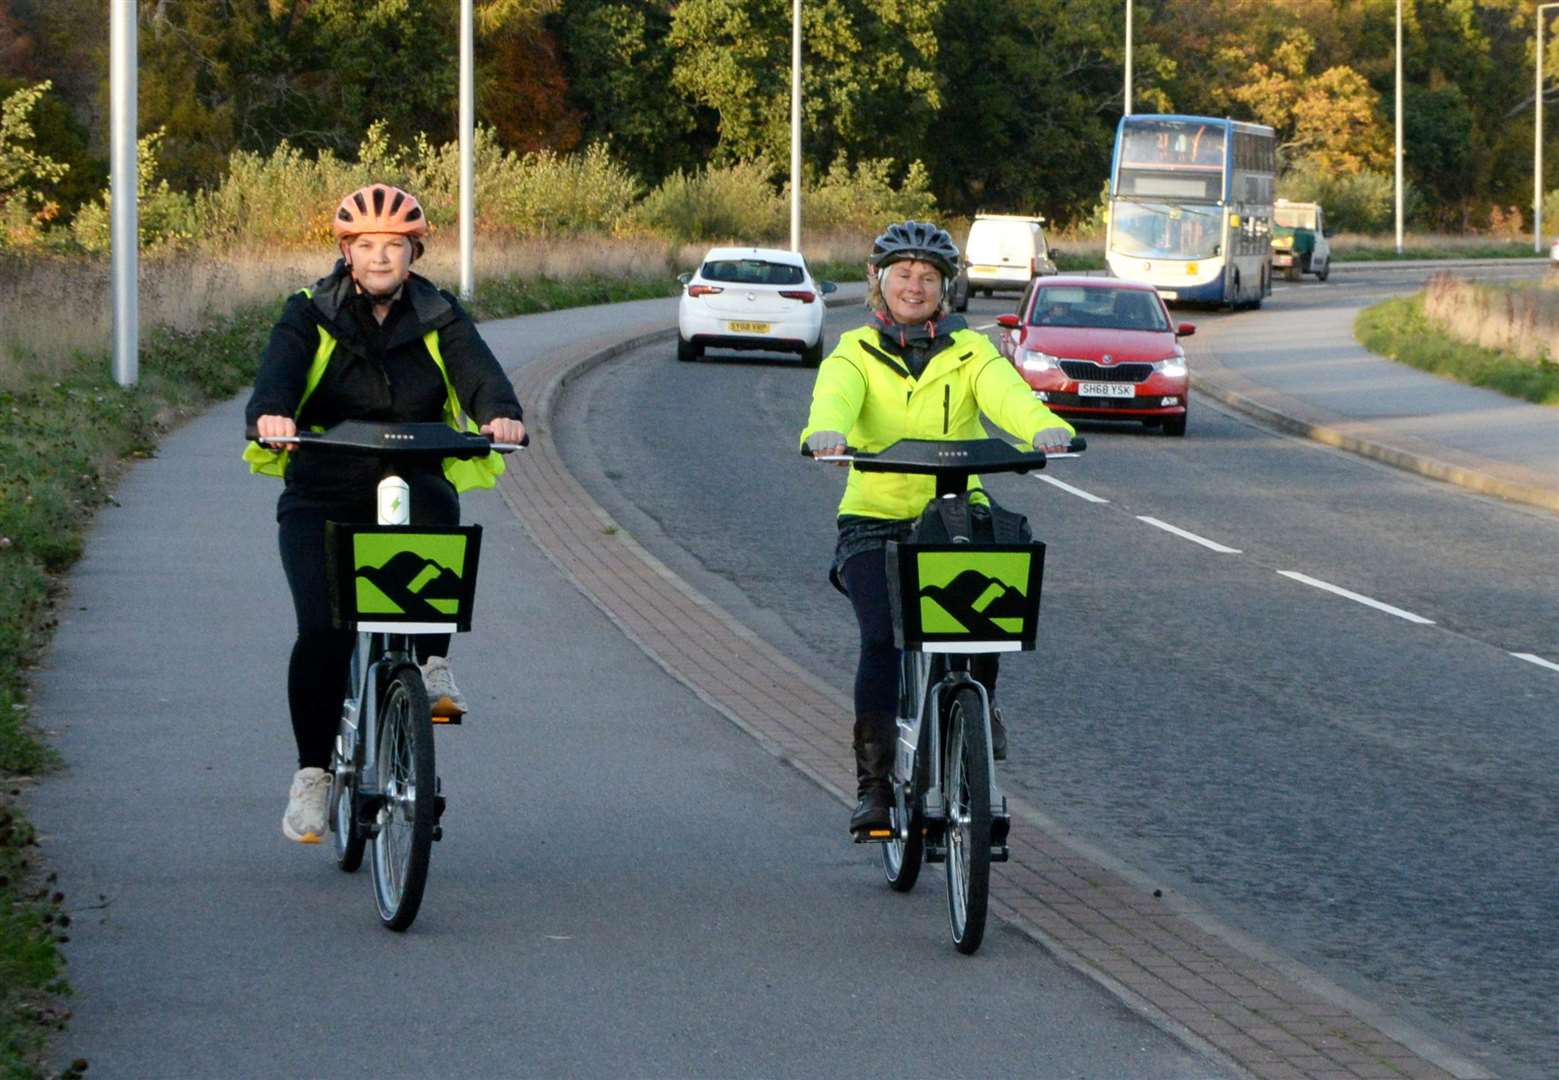 Imogen and Vikki on the shared-use path on the distributor road. Picture: James Mackenzie